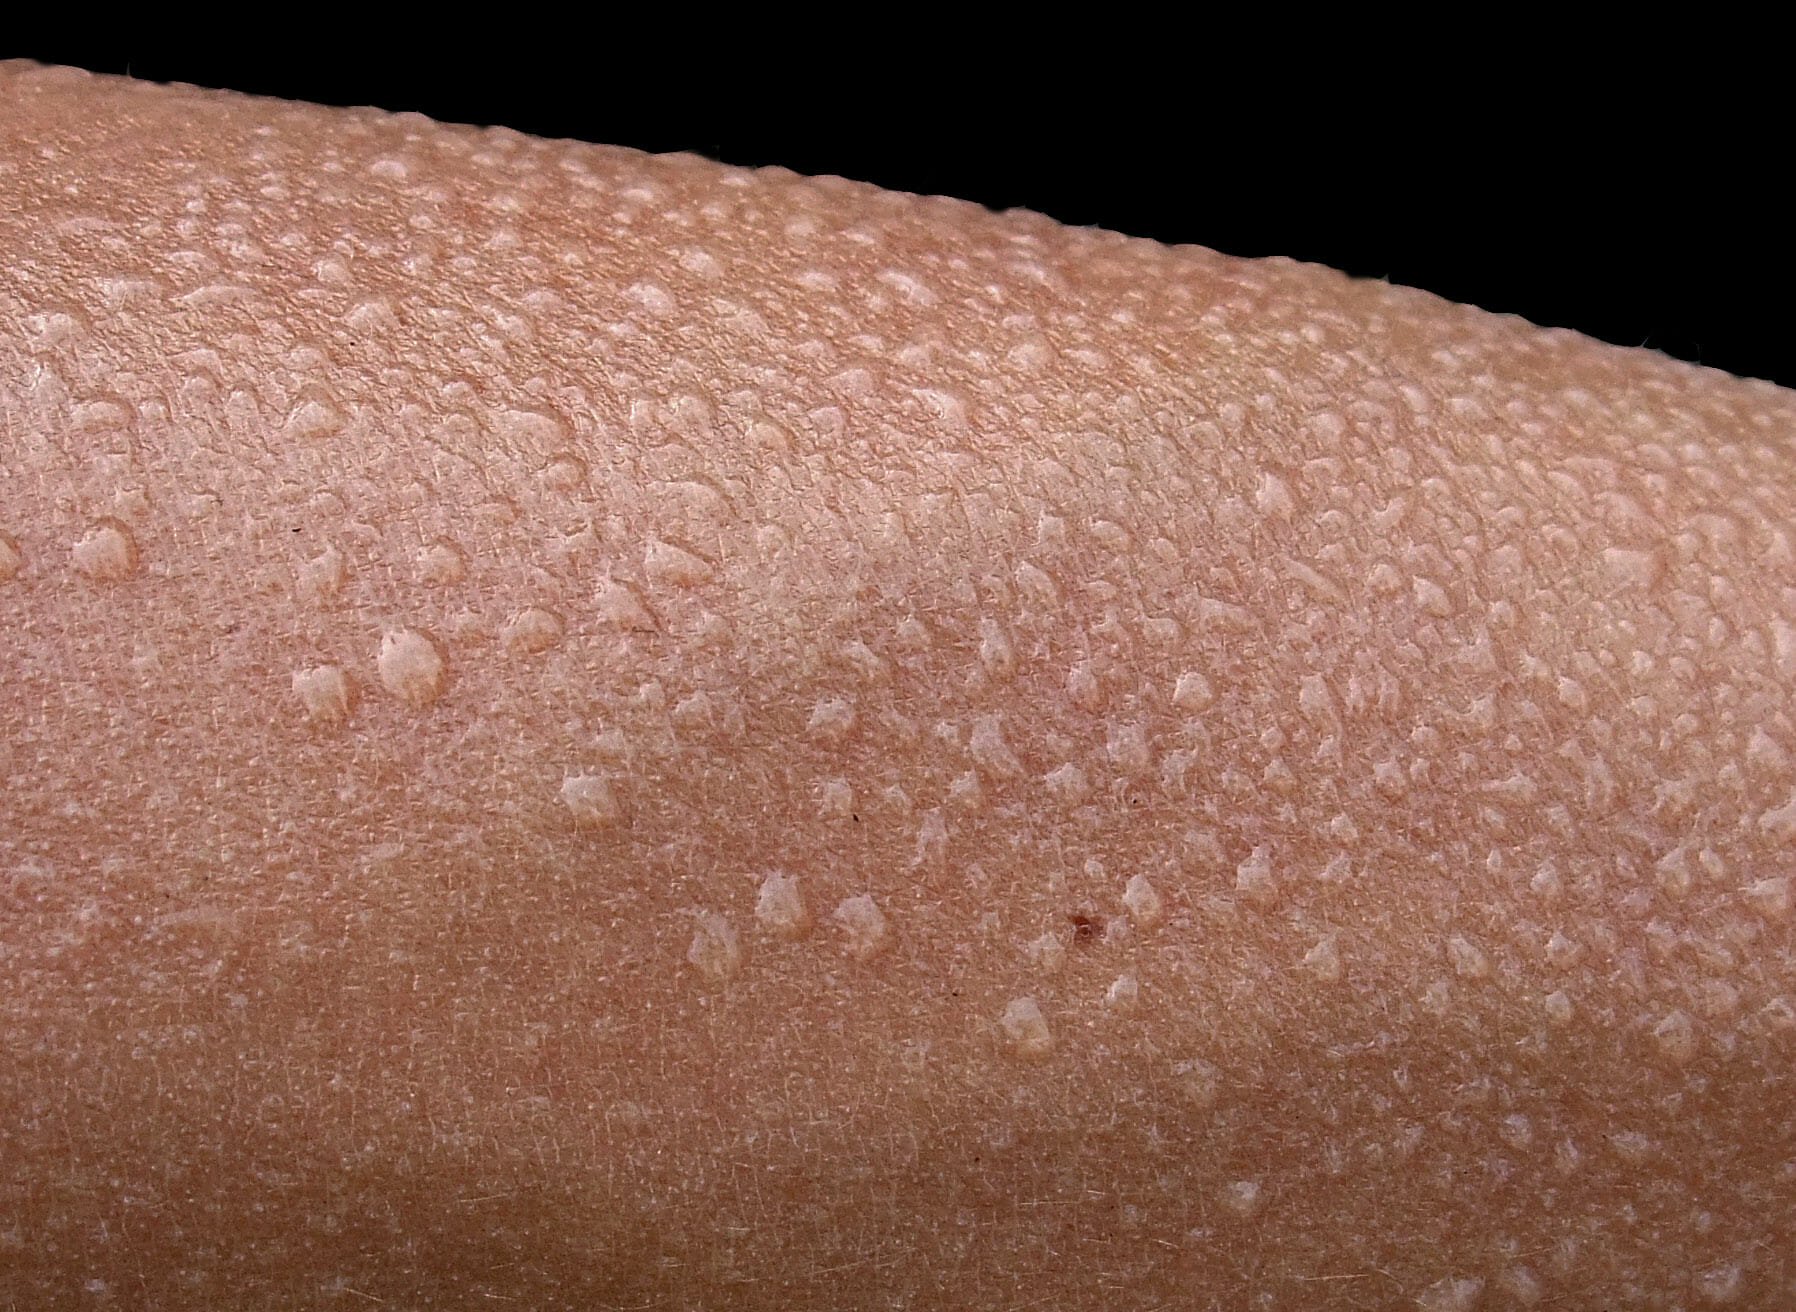 A close-up of eccrine perspiration on a forearm, presumably from heat or activity.